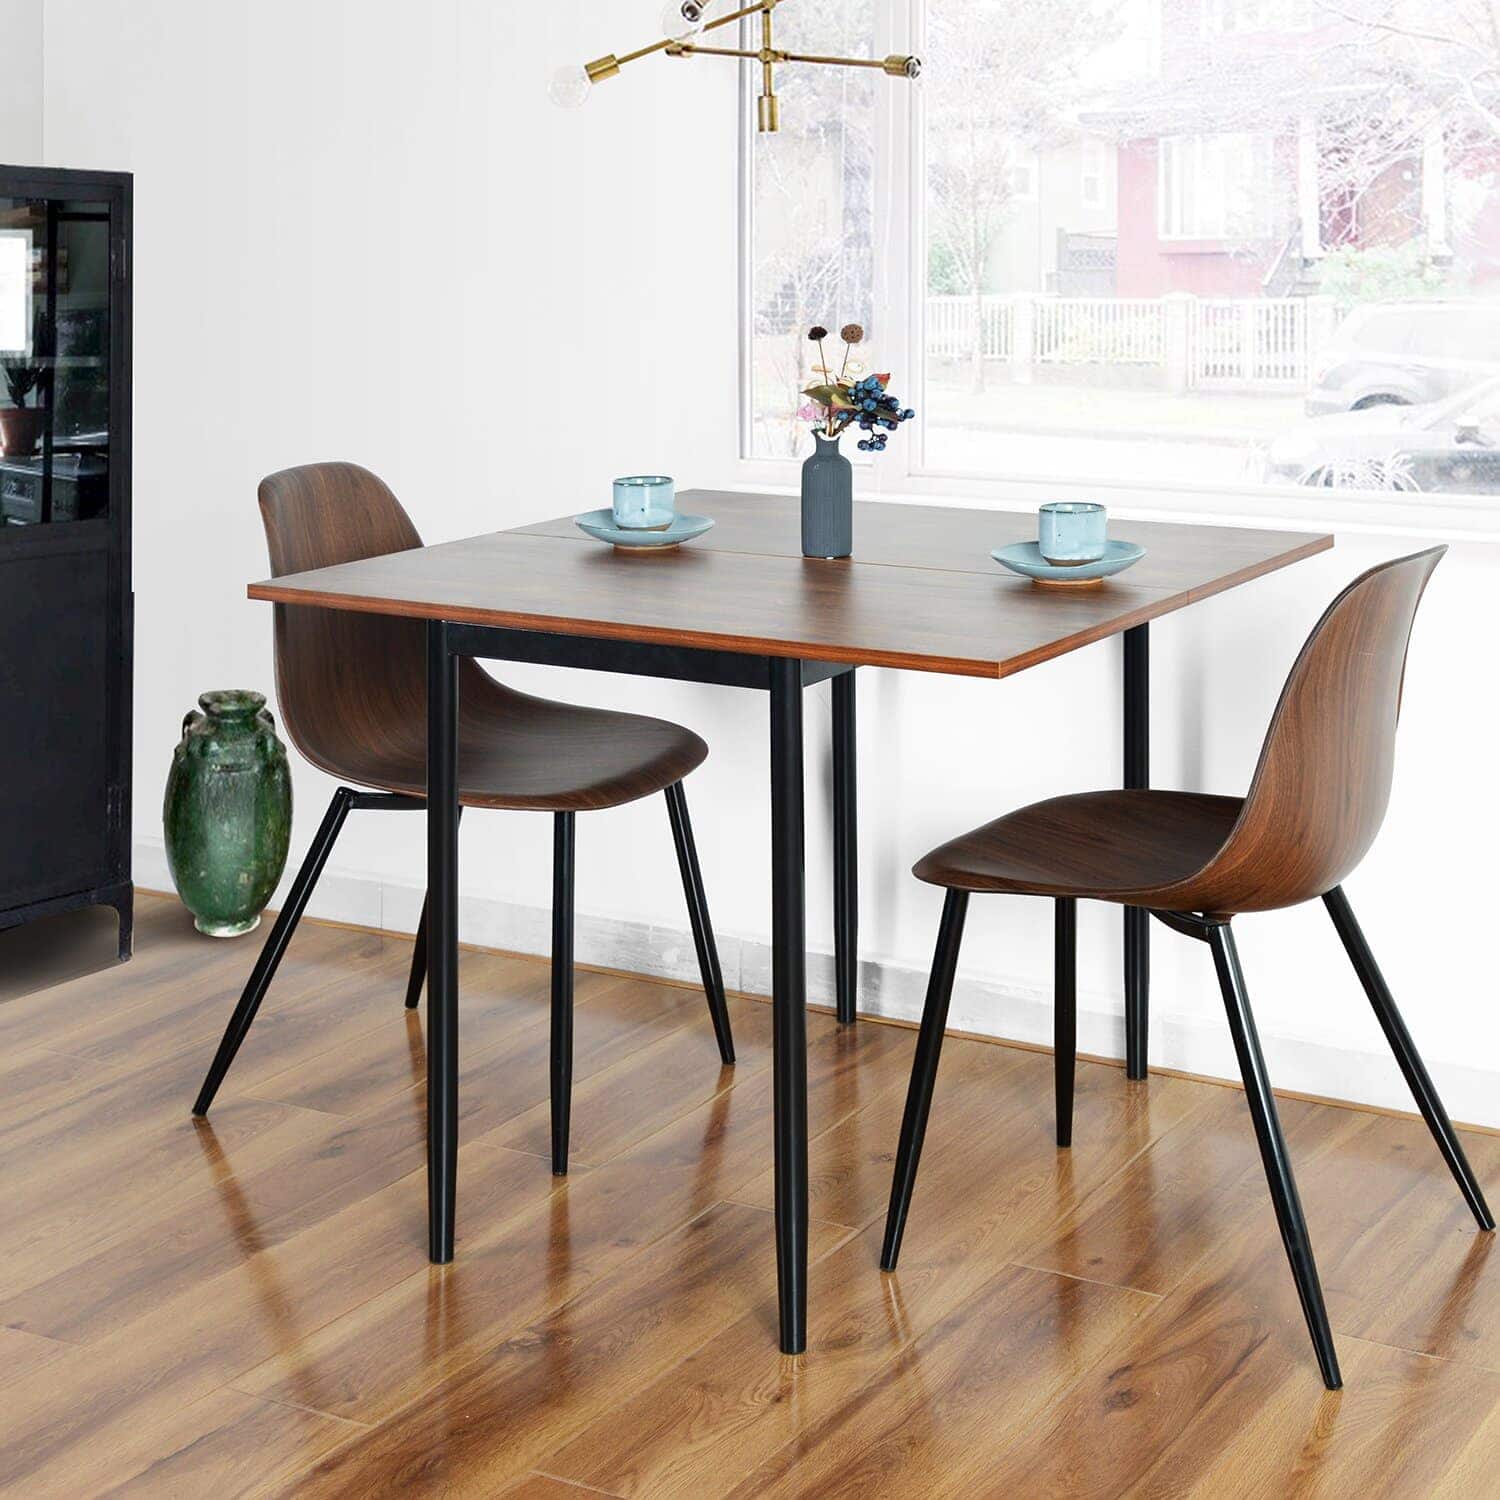 A Multi Functional Drop Leaf Table Perfect for Family Dinners